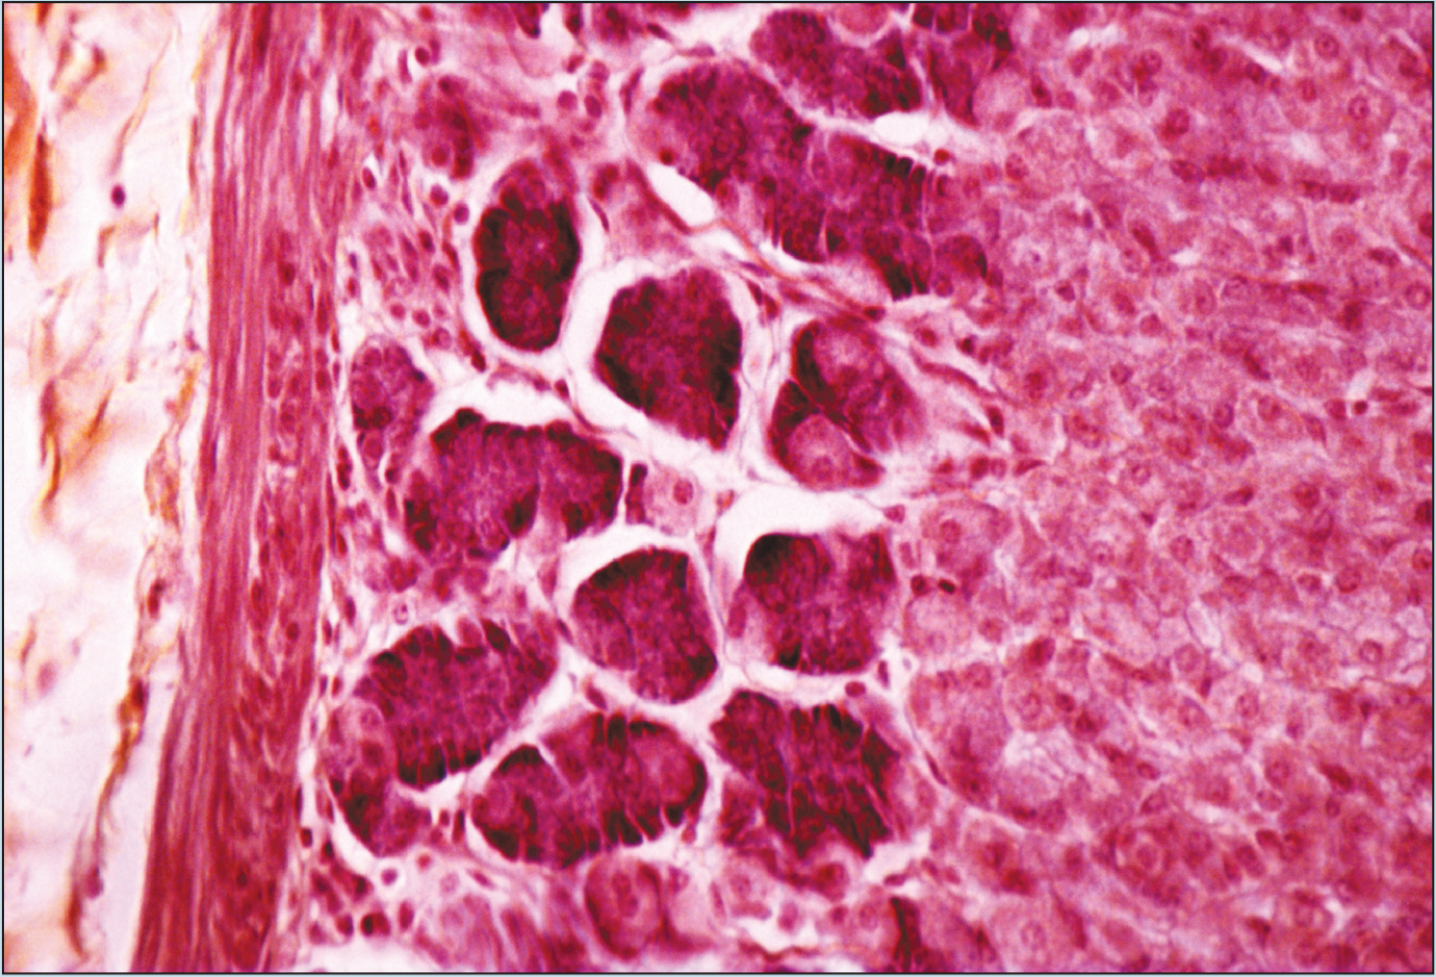 Slide image of fundic stomach - 100× magnification